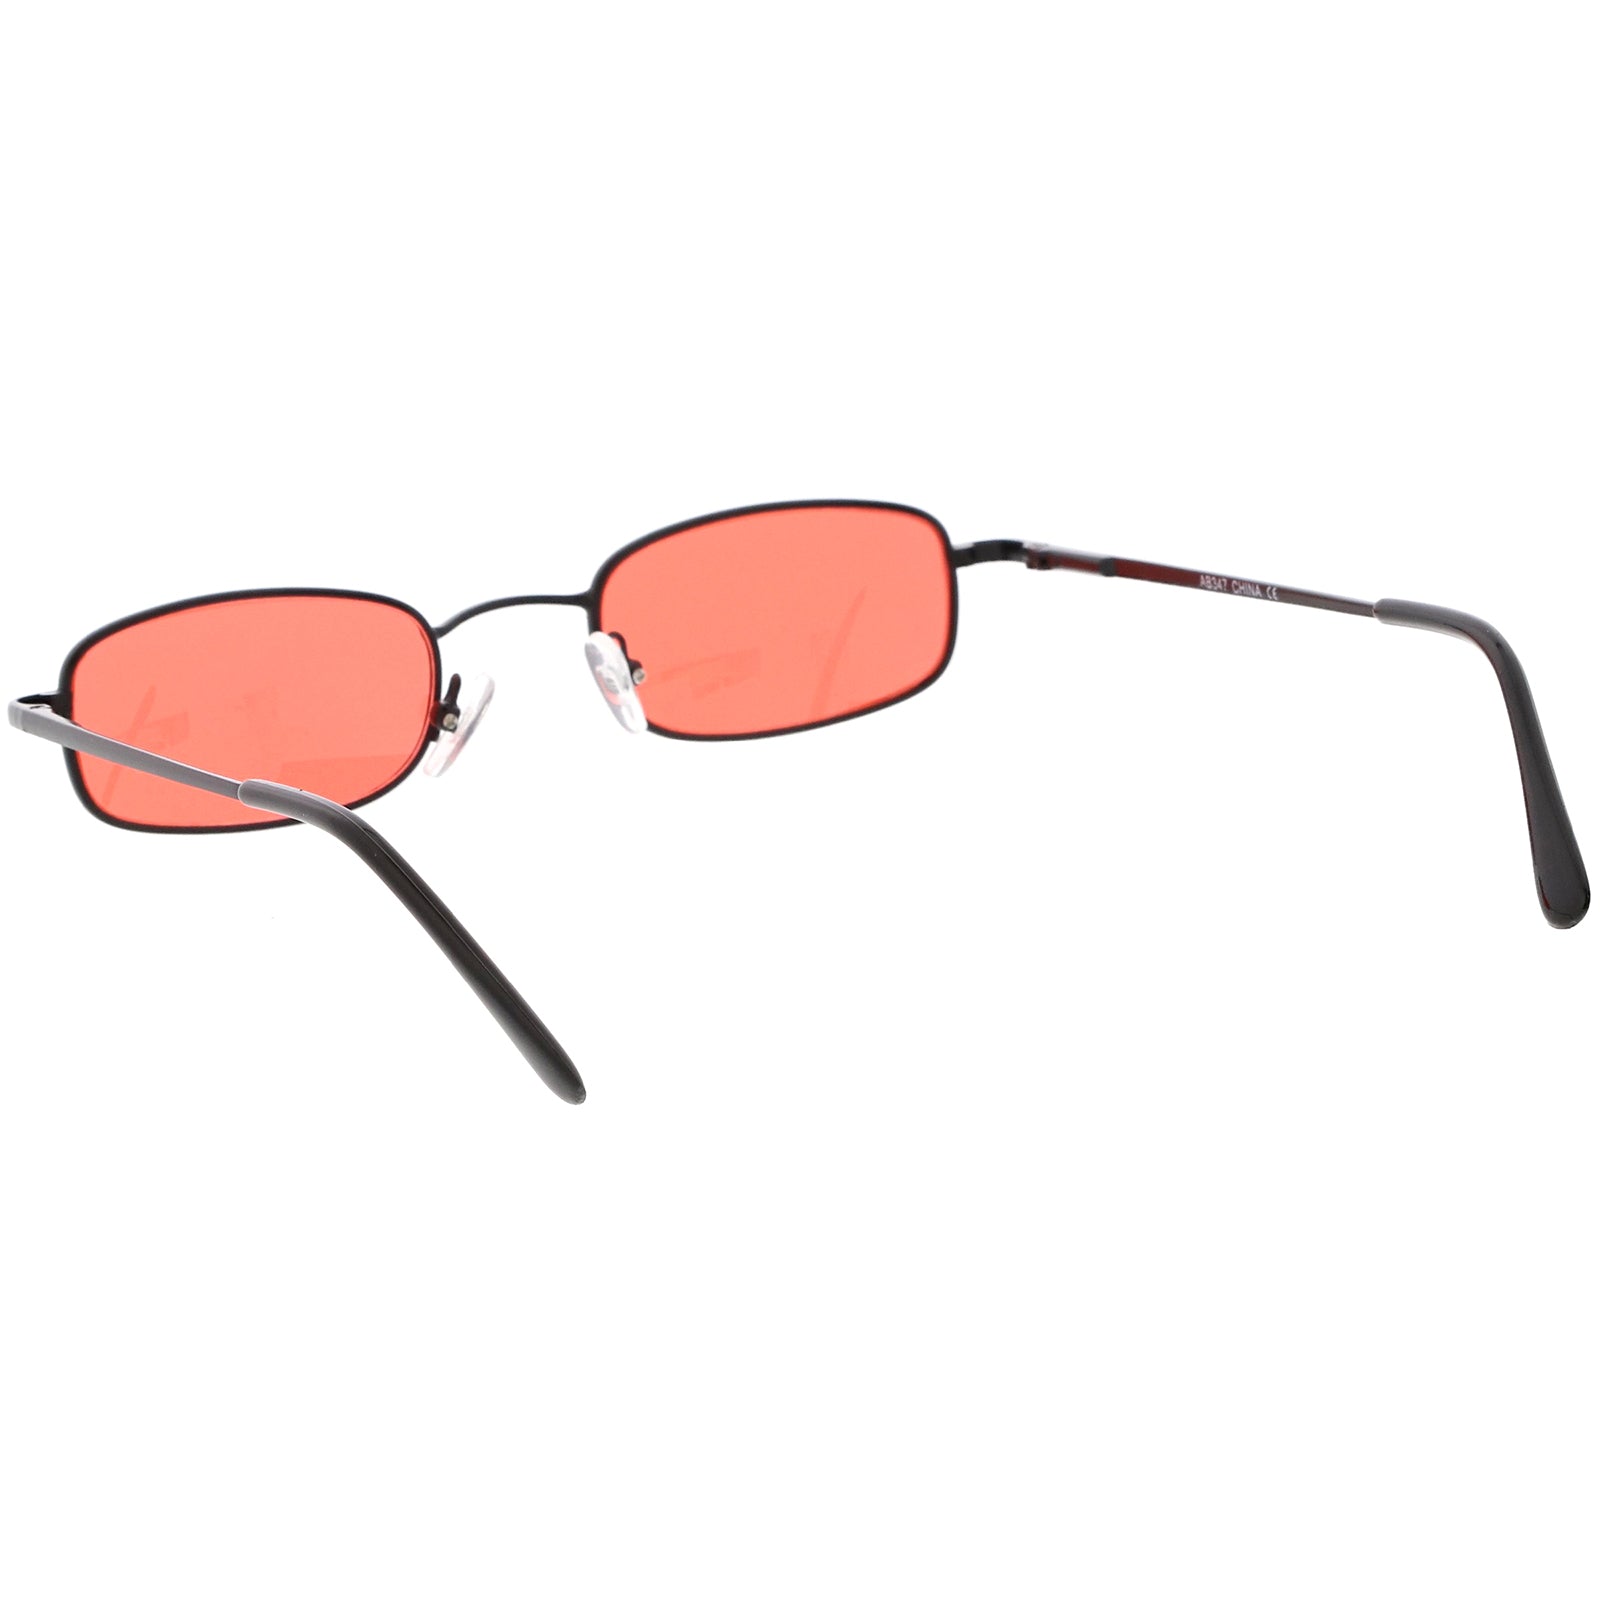 90s Small Rectangle Sunglasses Slim Arms Color Tinted Lens 45mm 